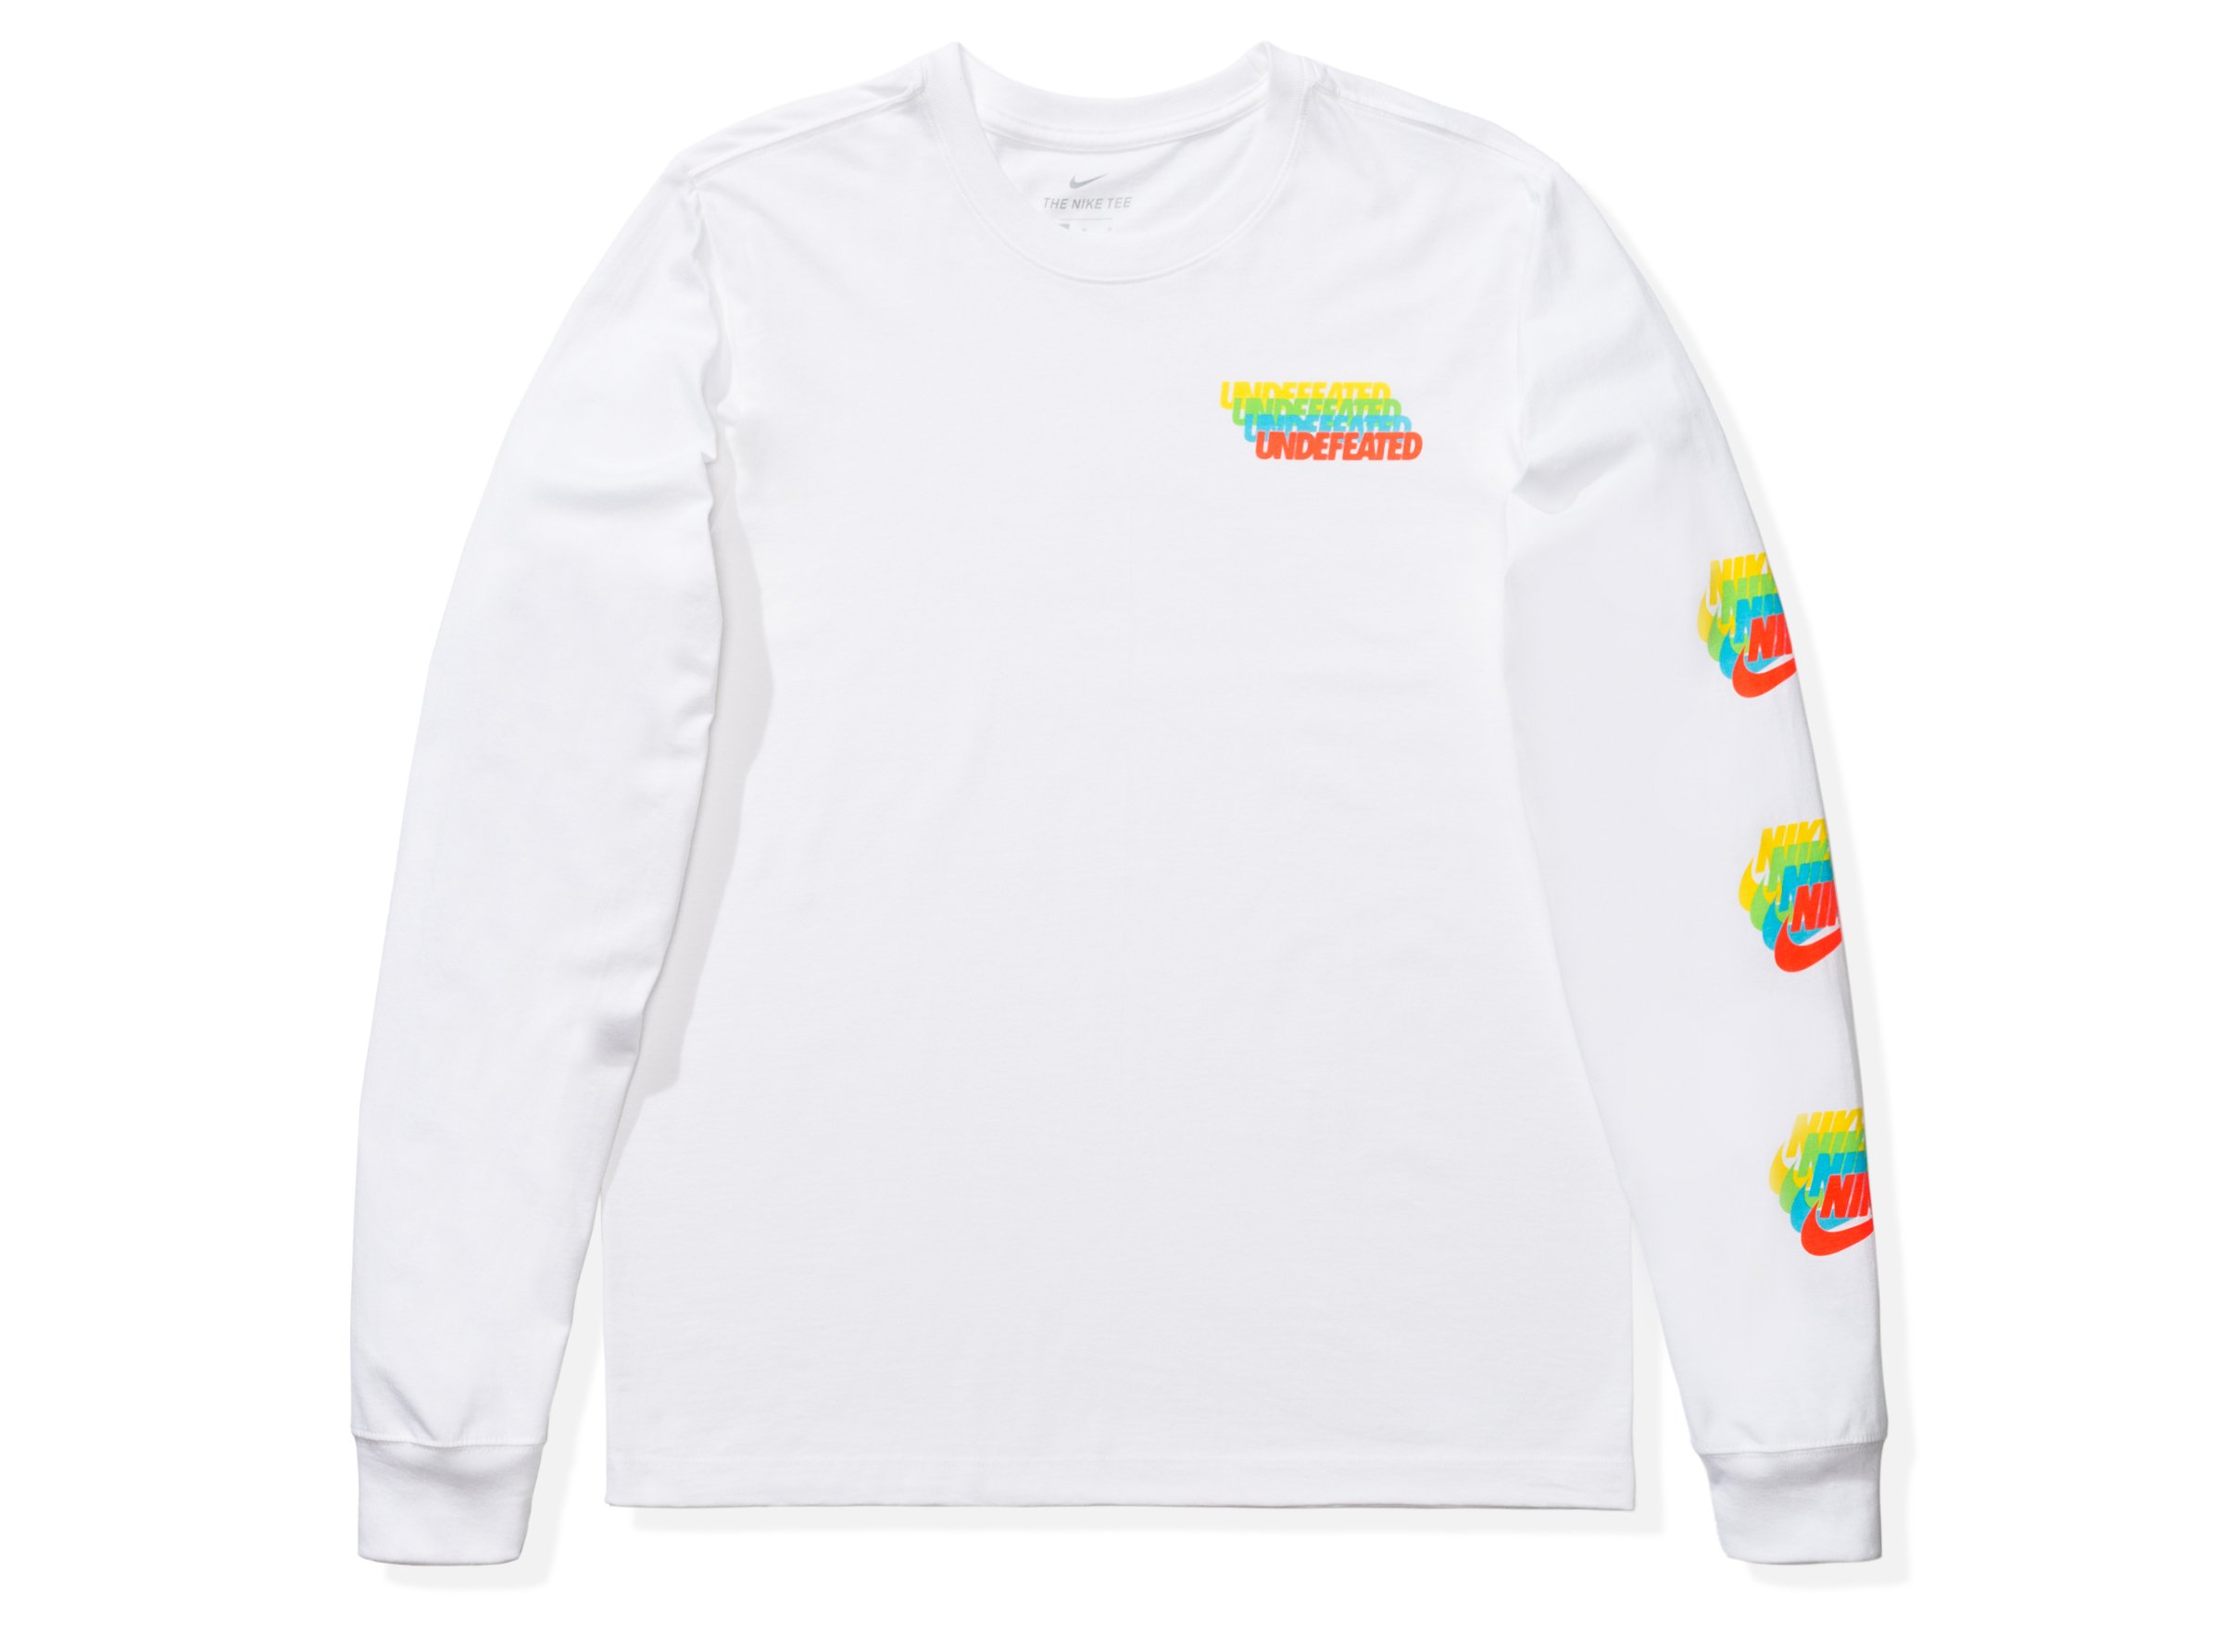 Nike x Undefeated L/S Tee White